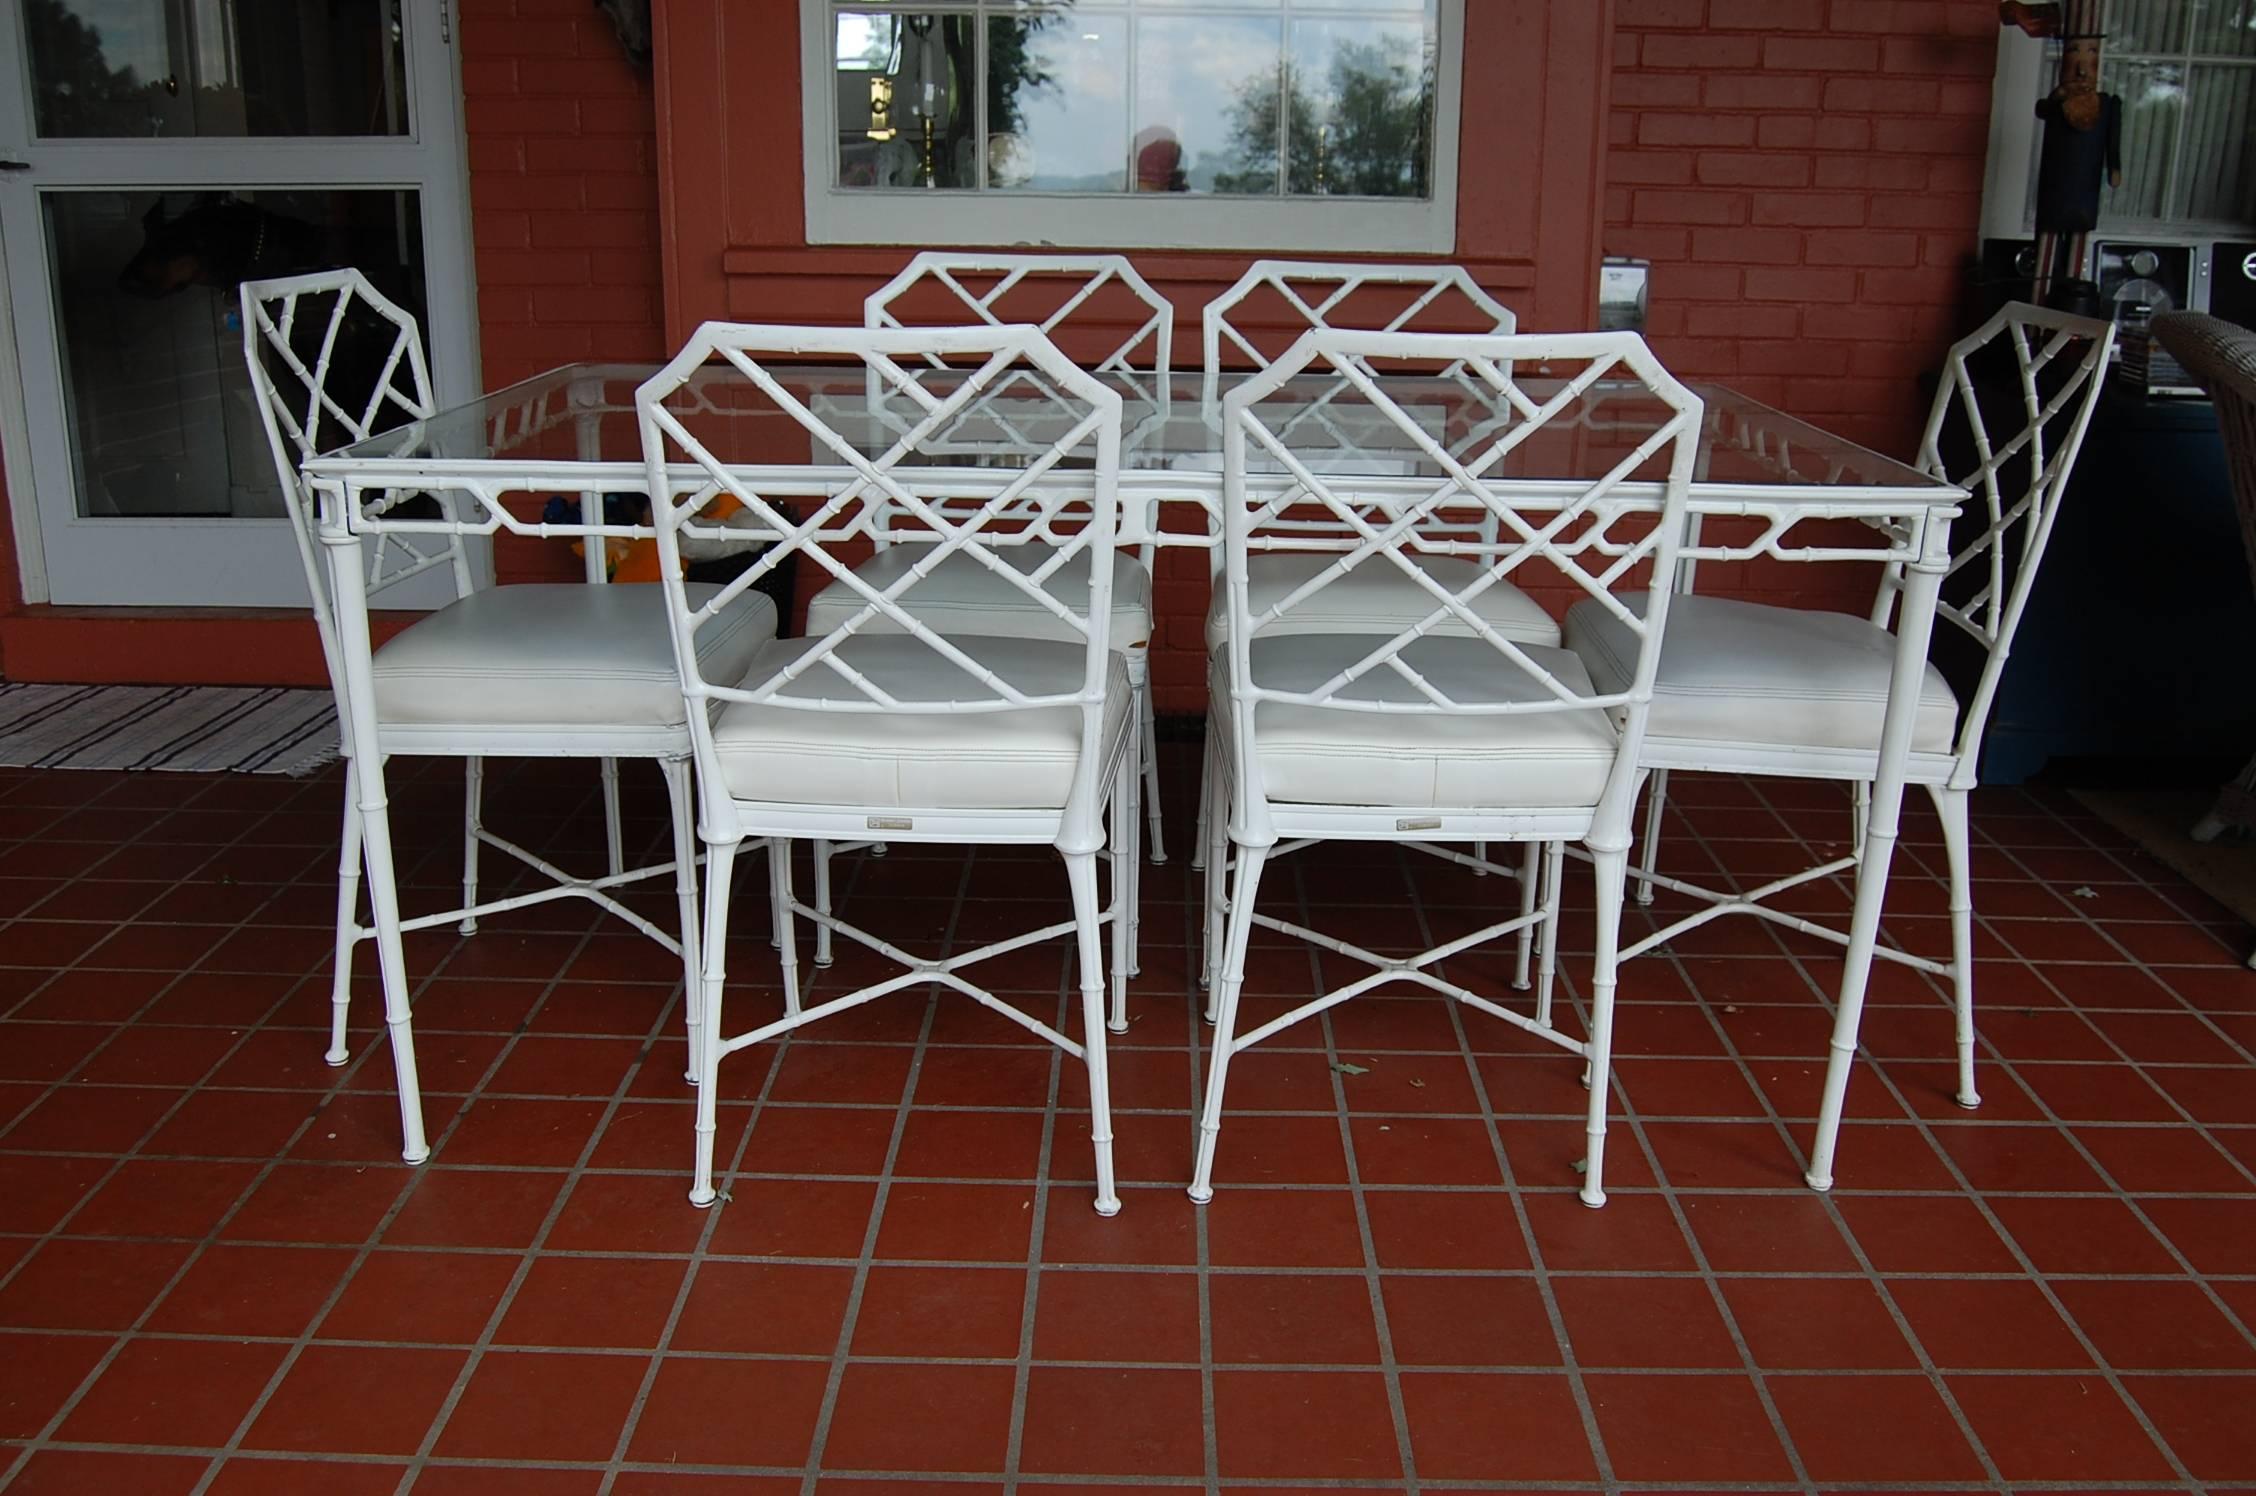 Brown Jordan Calcutta aluminum rectangular table with six side chairs measuring 35 inches x 61 inches long. Very nice set in a rather hard find rectangular size. Everything is tight and stable, good overall condition with some paint loss as shown. 